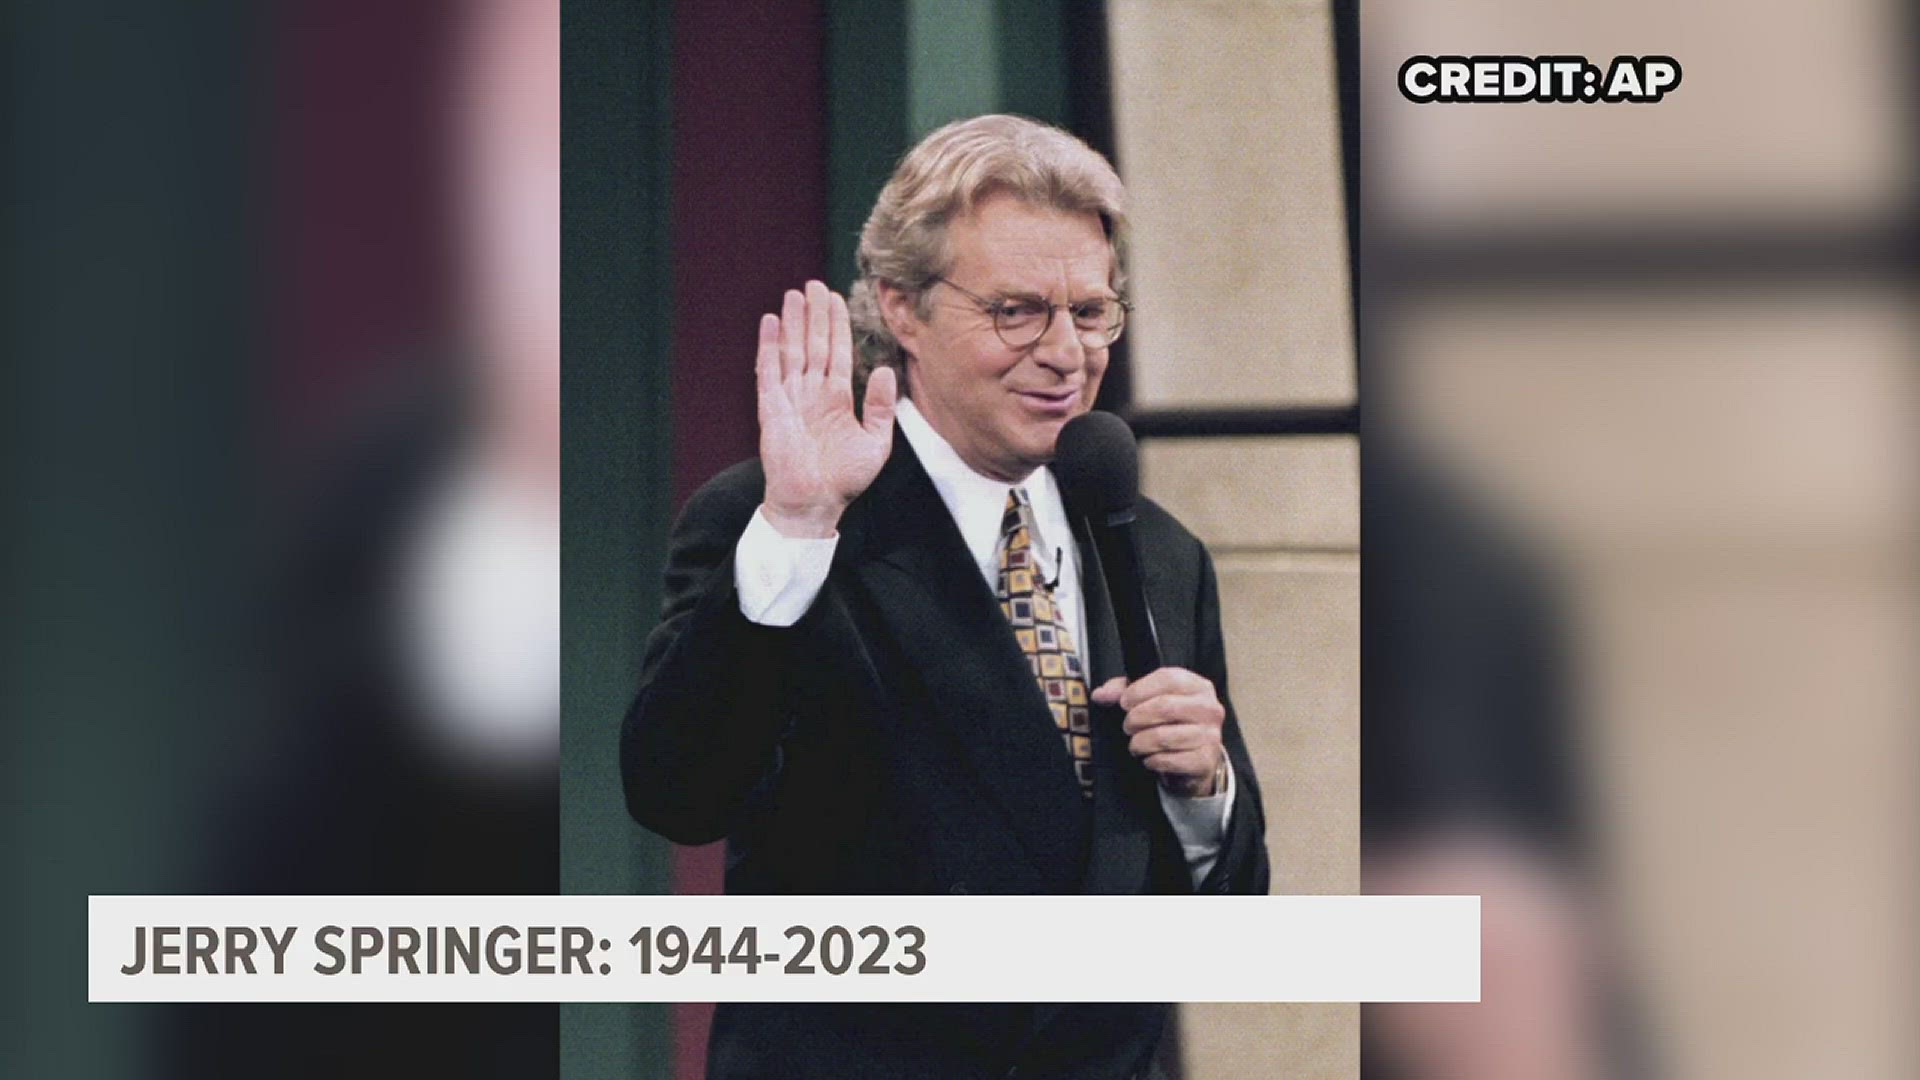 On his Twitter profile, Jerry Springer jokingly declared himself as “Talk show host, ringmaster of civilization’s end.”